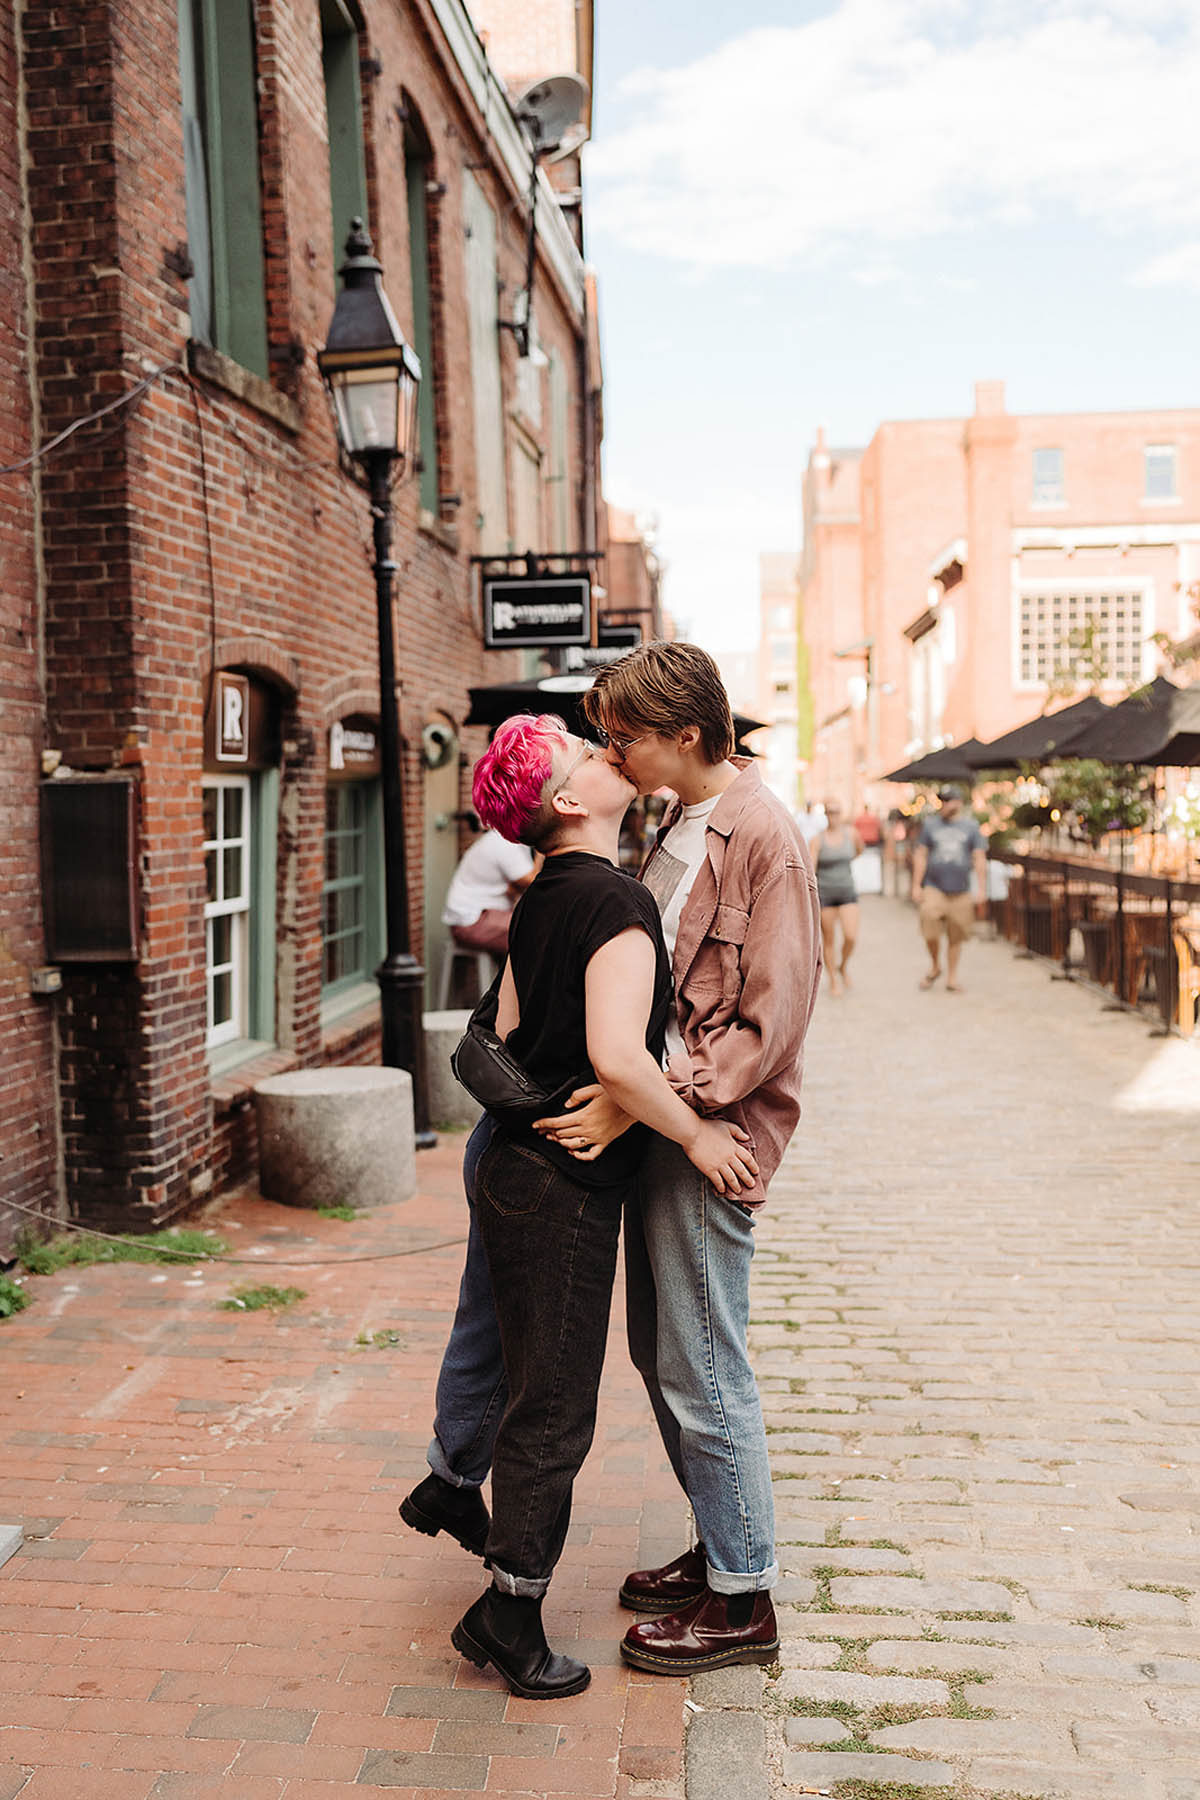 Two white people stand kissing on a red brick sidewalk in Maine. The one on the left has pink short hair, and the other has short brown hair.